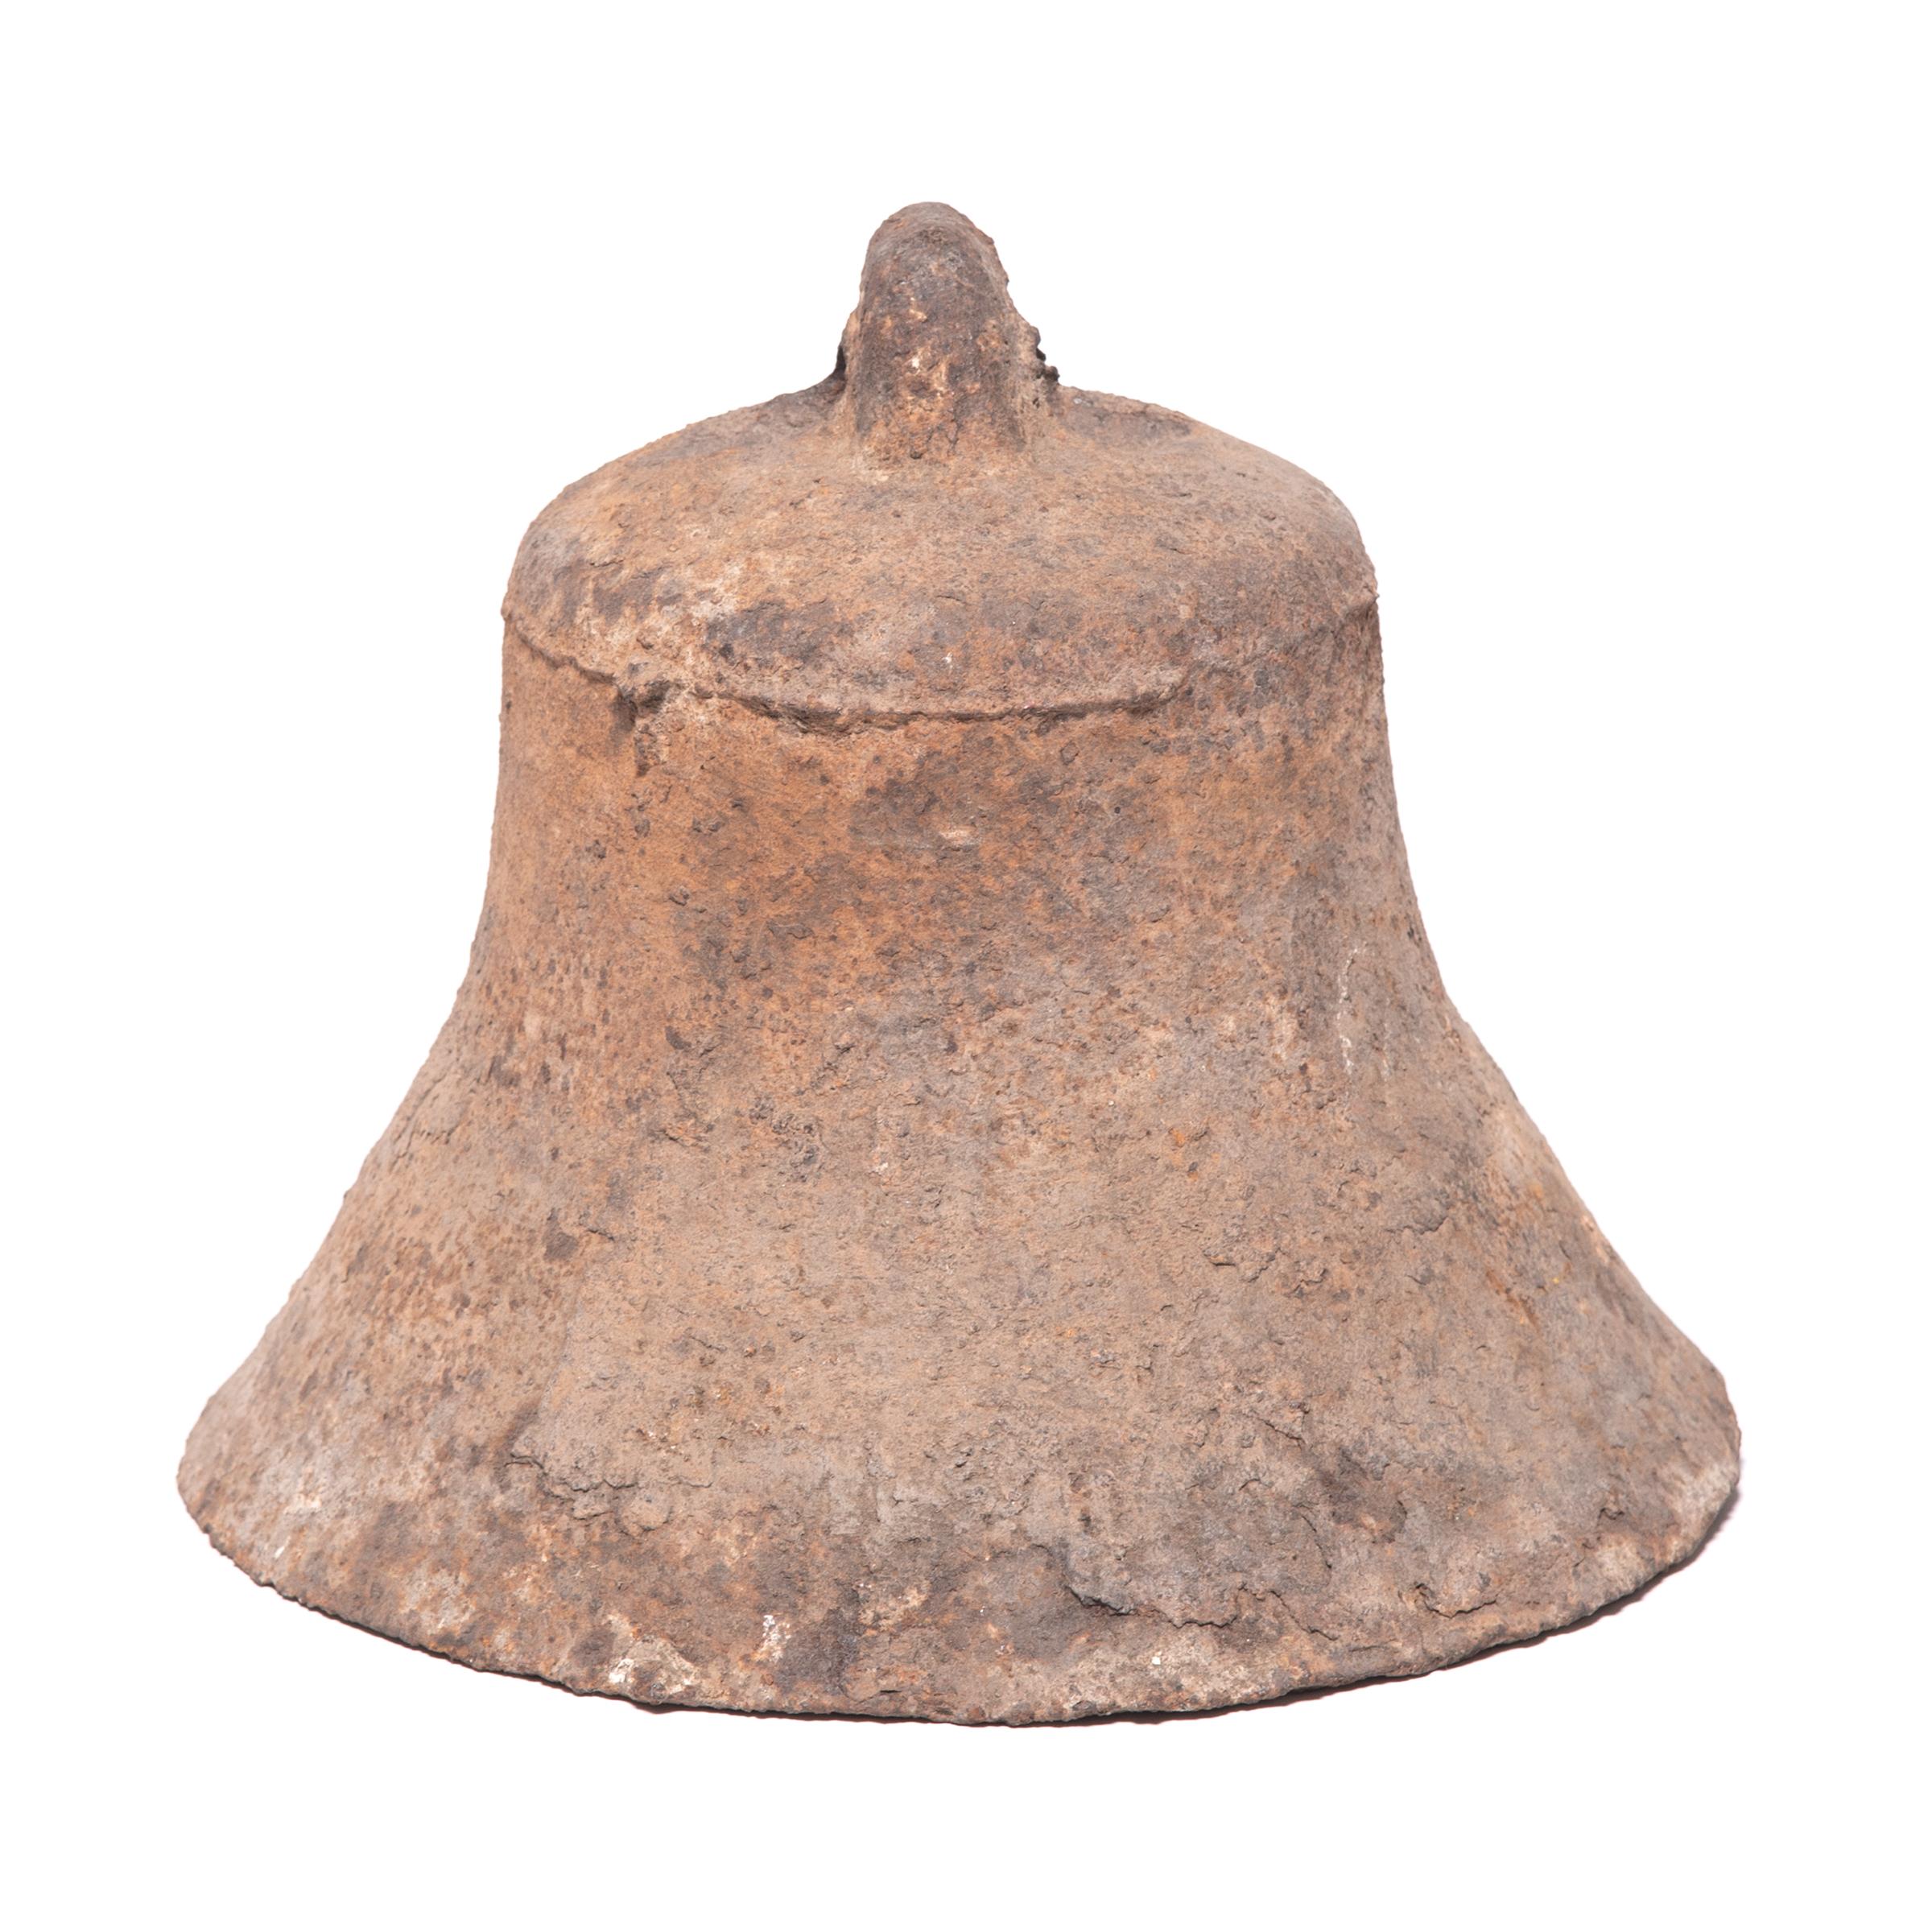 This rustic, 19th century iron bell once pealed in celebration or gave notice of important events in a town in northern China. The flare of this bell gives it a unique sculptural form, perfectly complemented by its rusted, textured surface. The